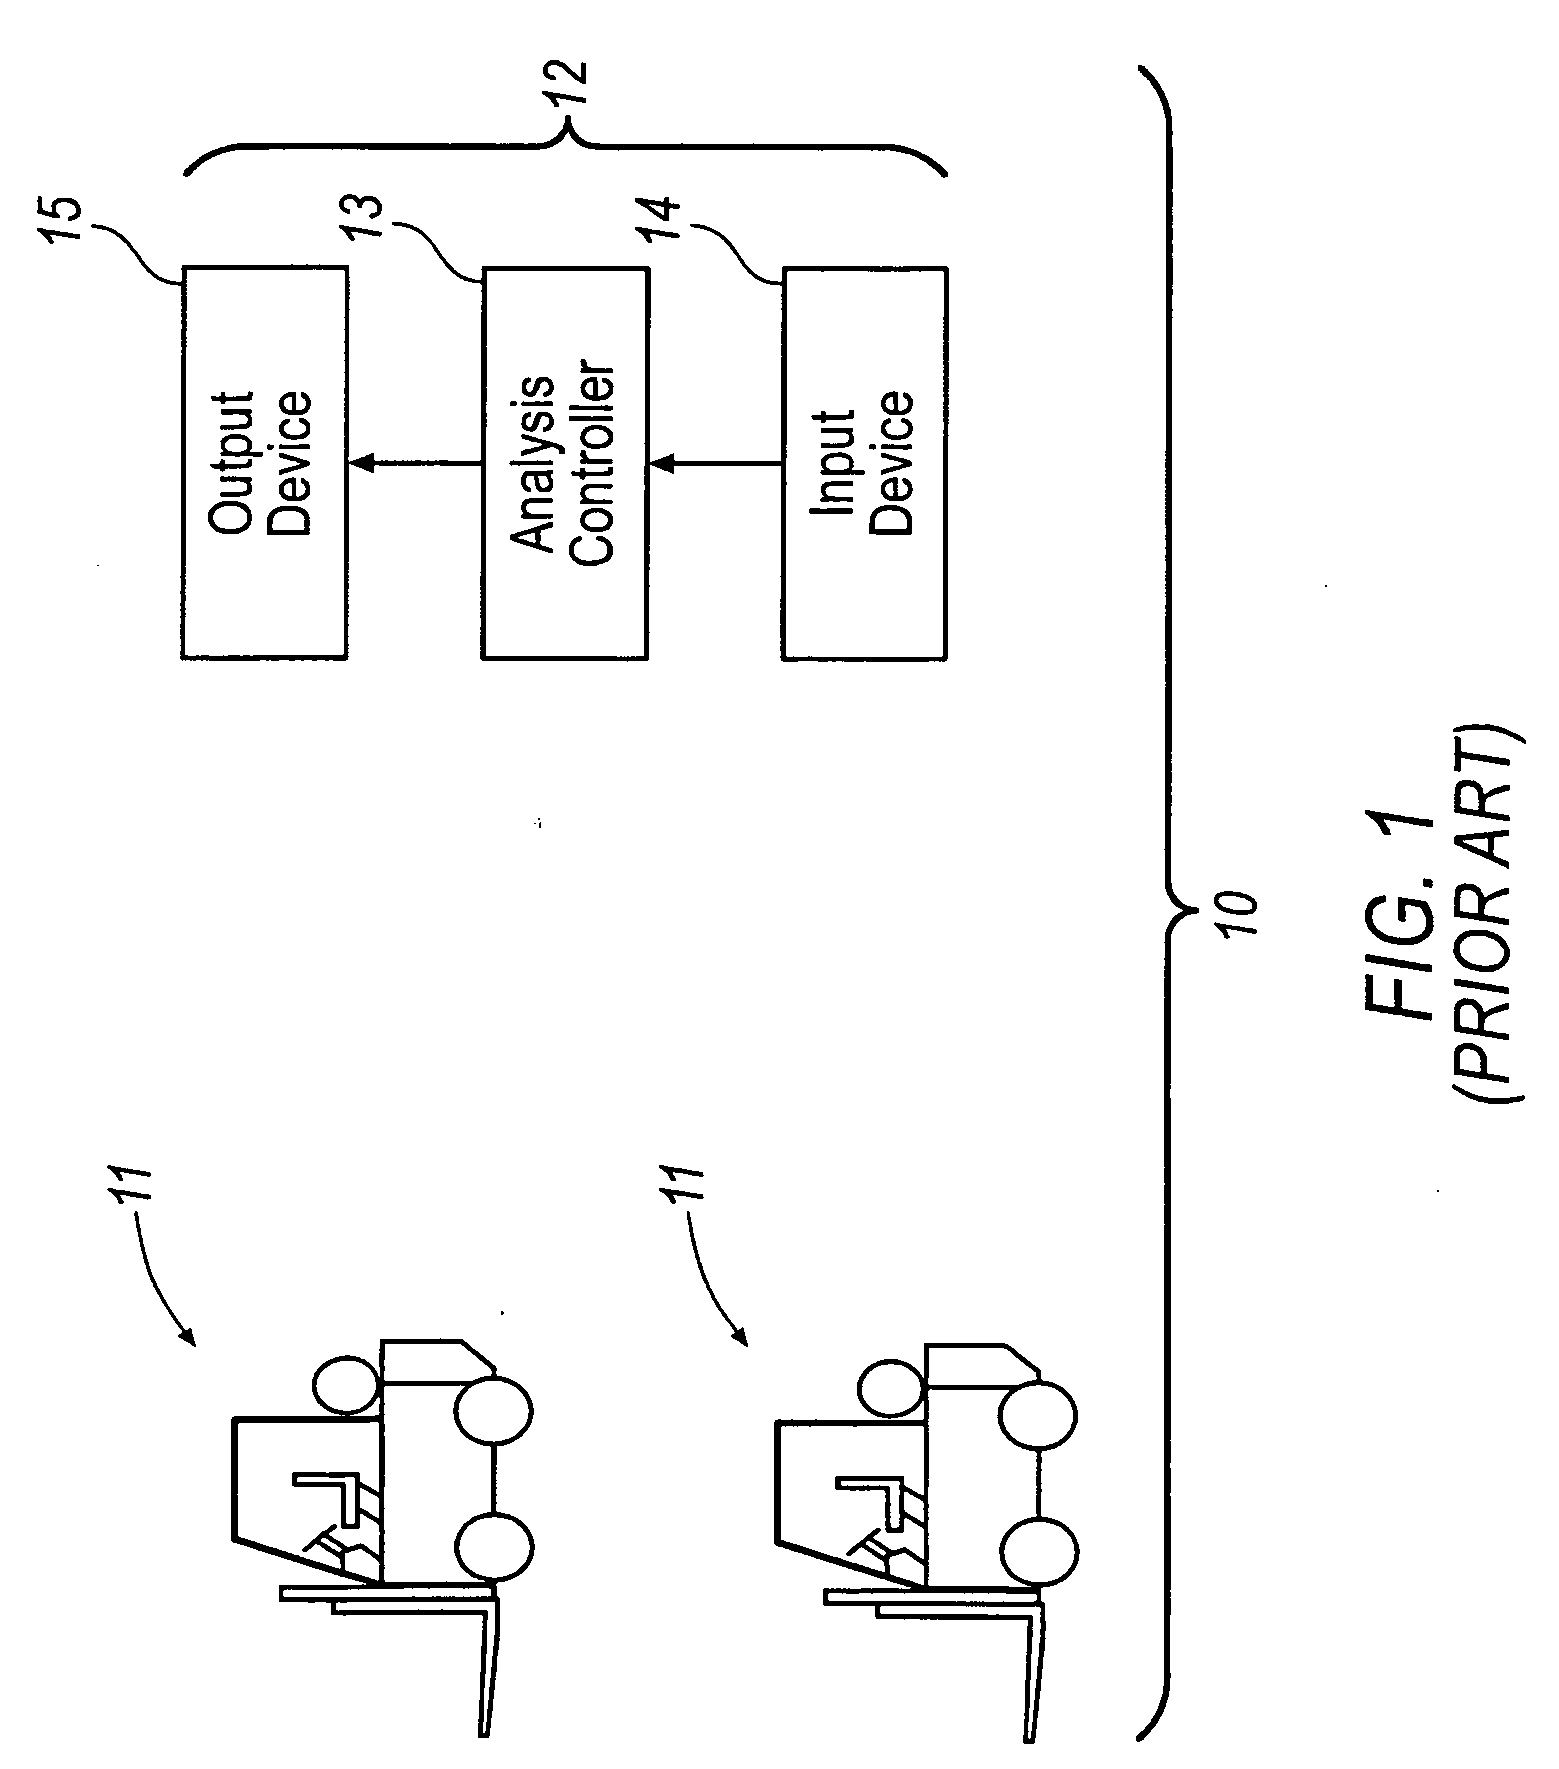 Apparatus and method for tracking and managing physical assets